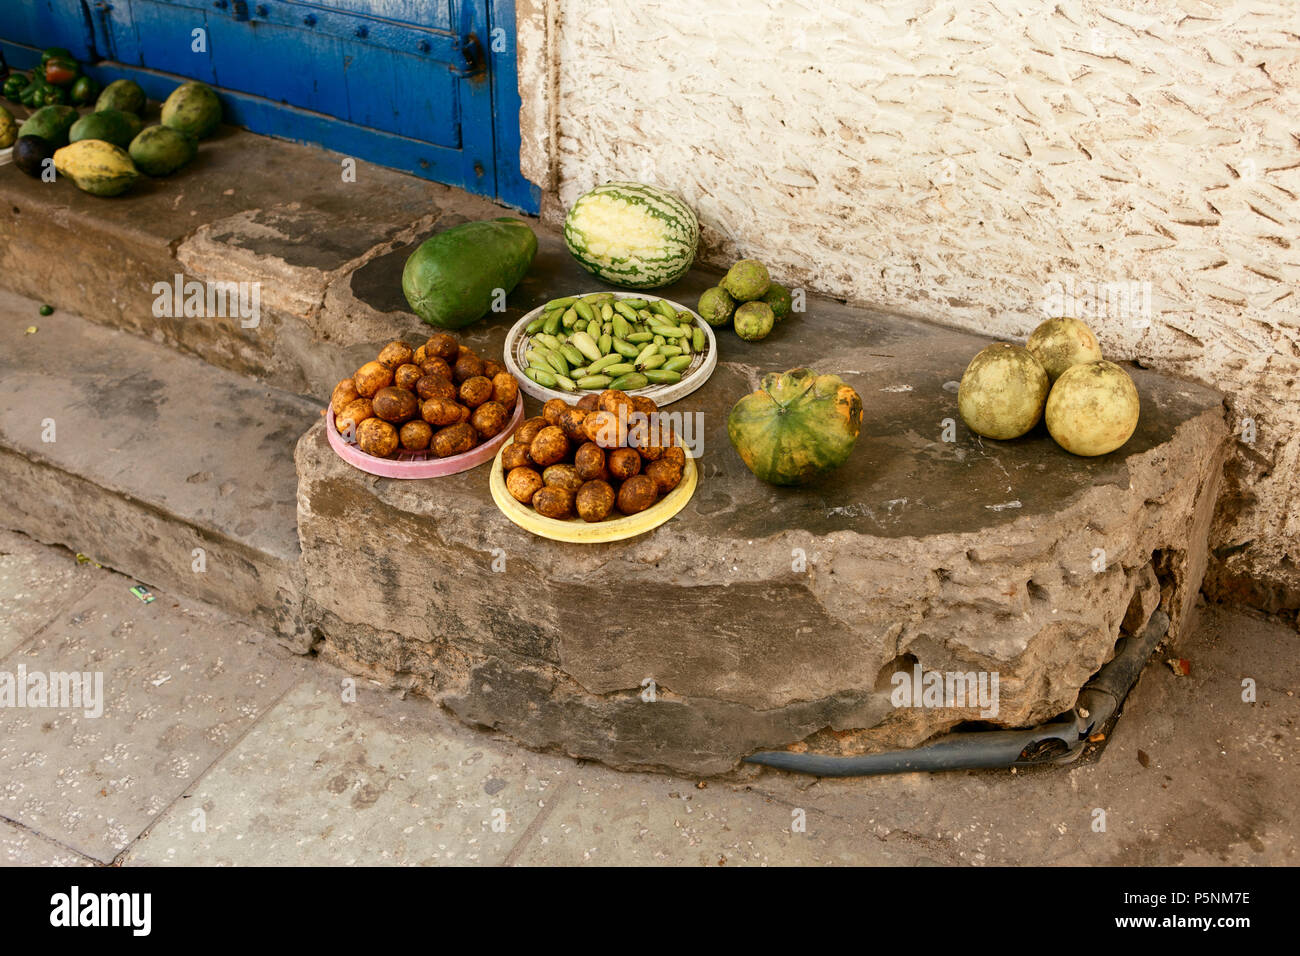 African fruits in unsanitary conditions at African market Stock Photo